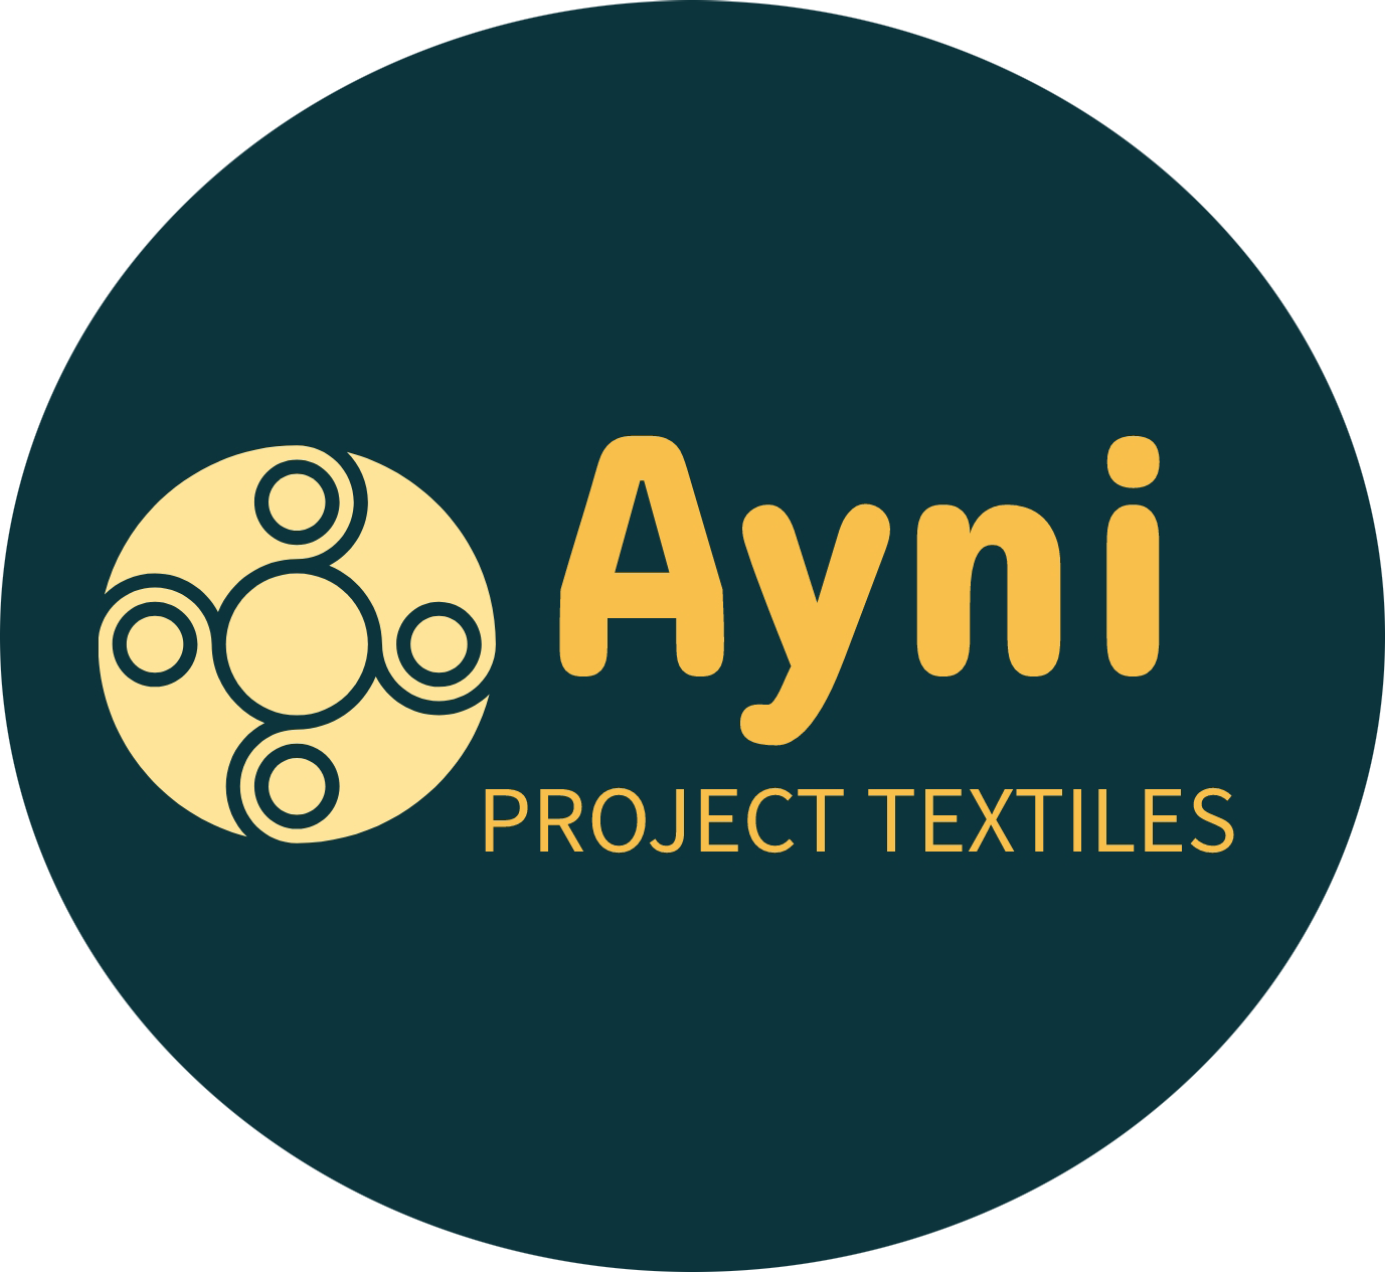 Ayni Project Textiles